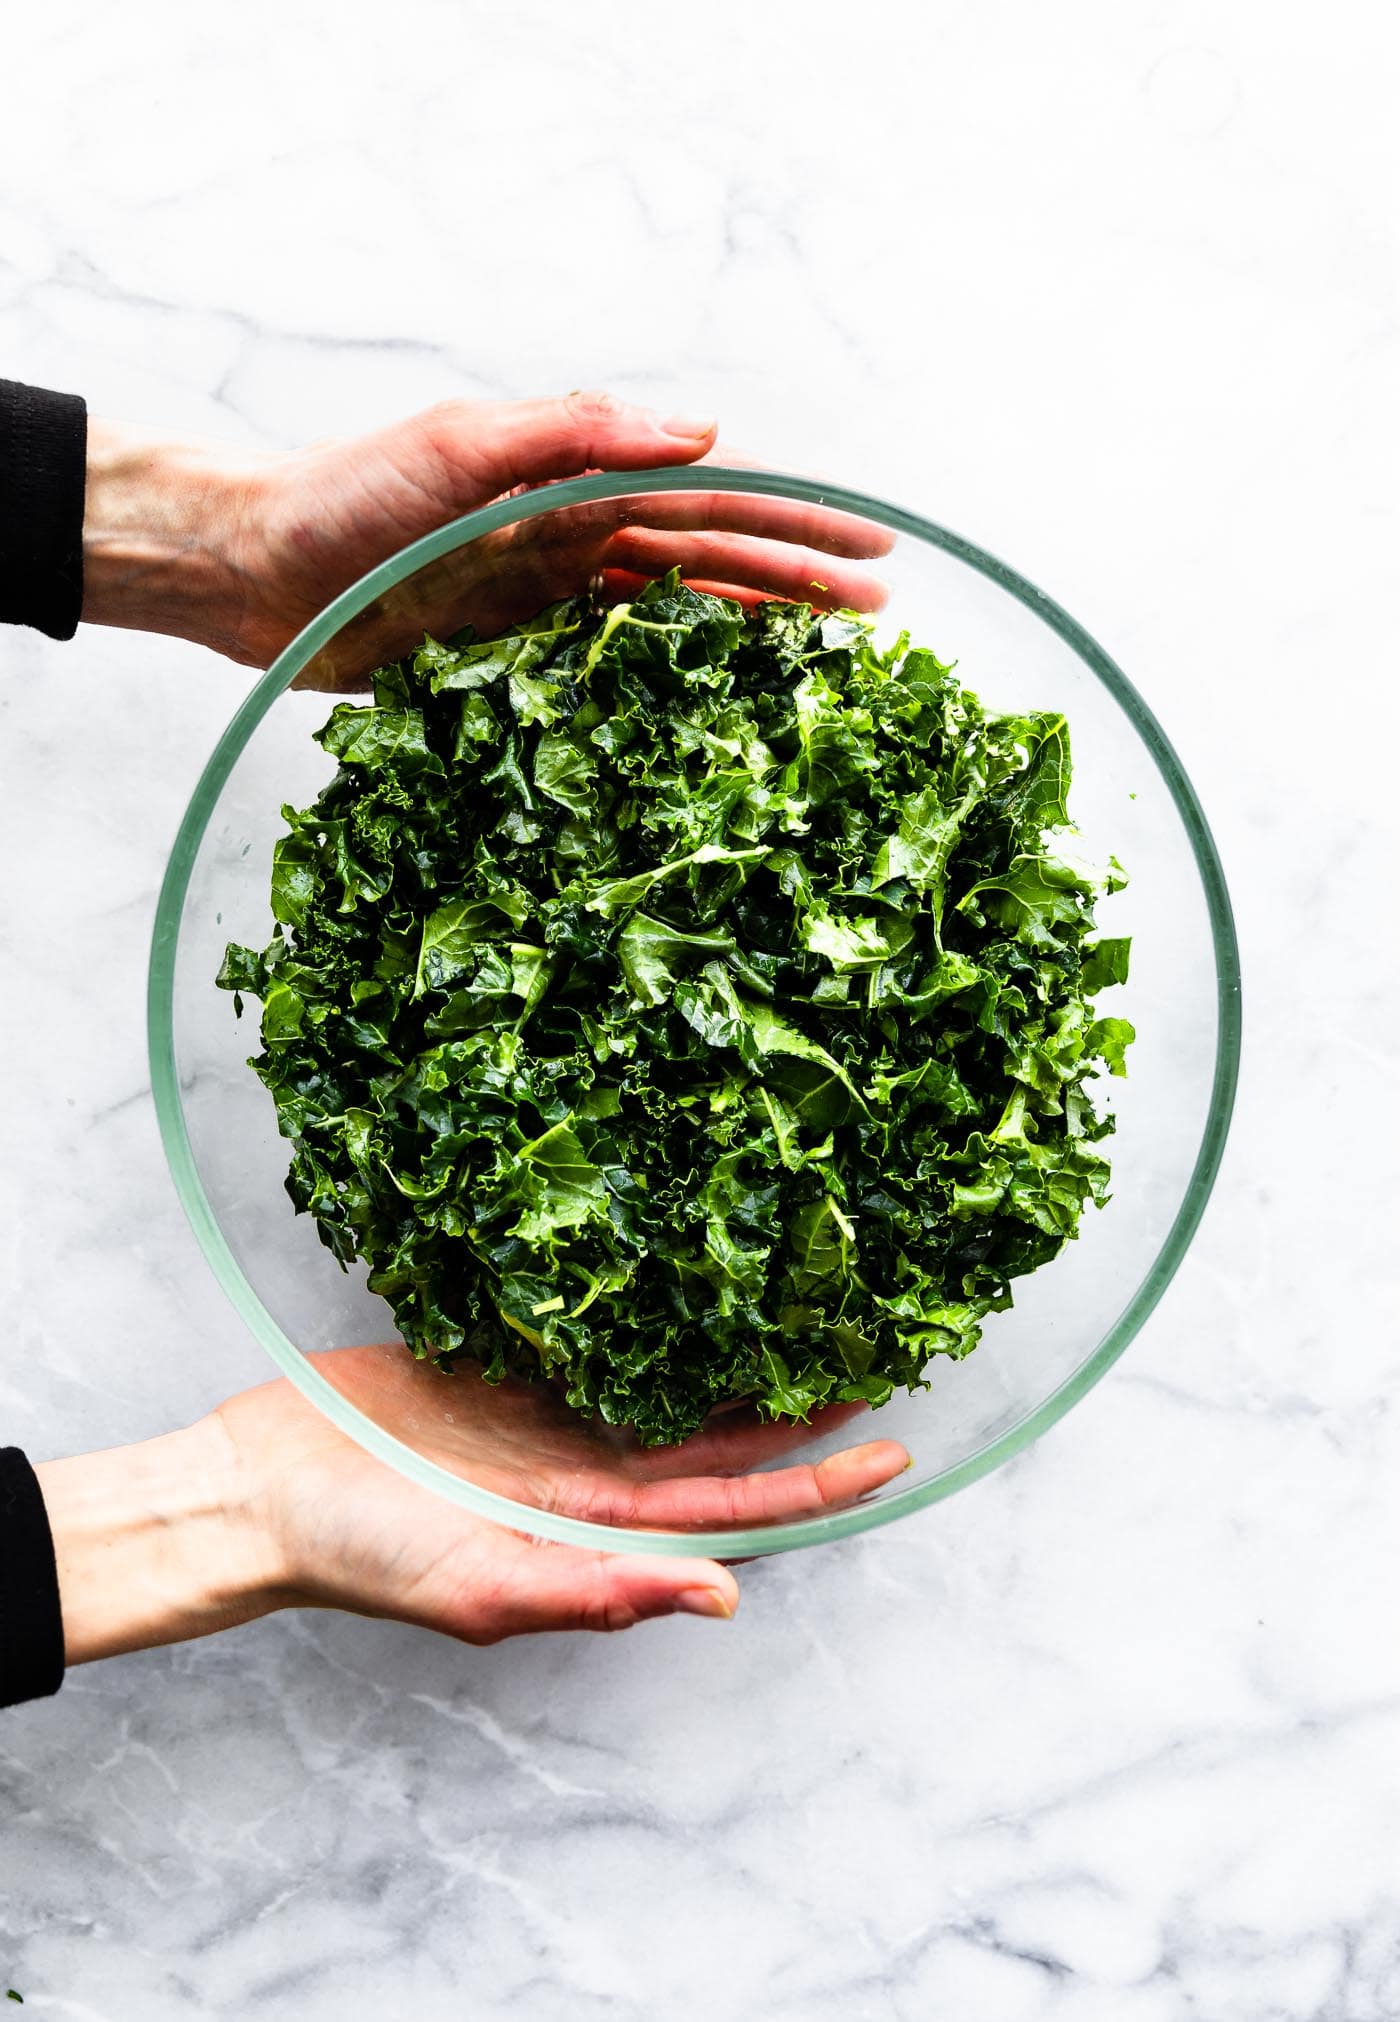 Two hands holding a clear glass bowl filled with massaged kale.